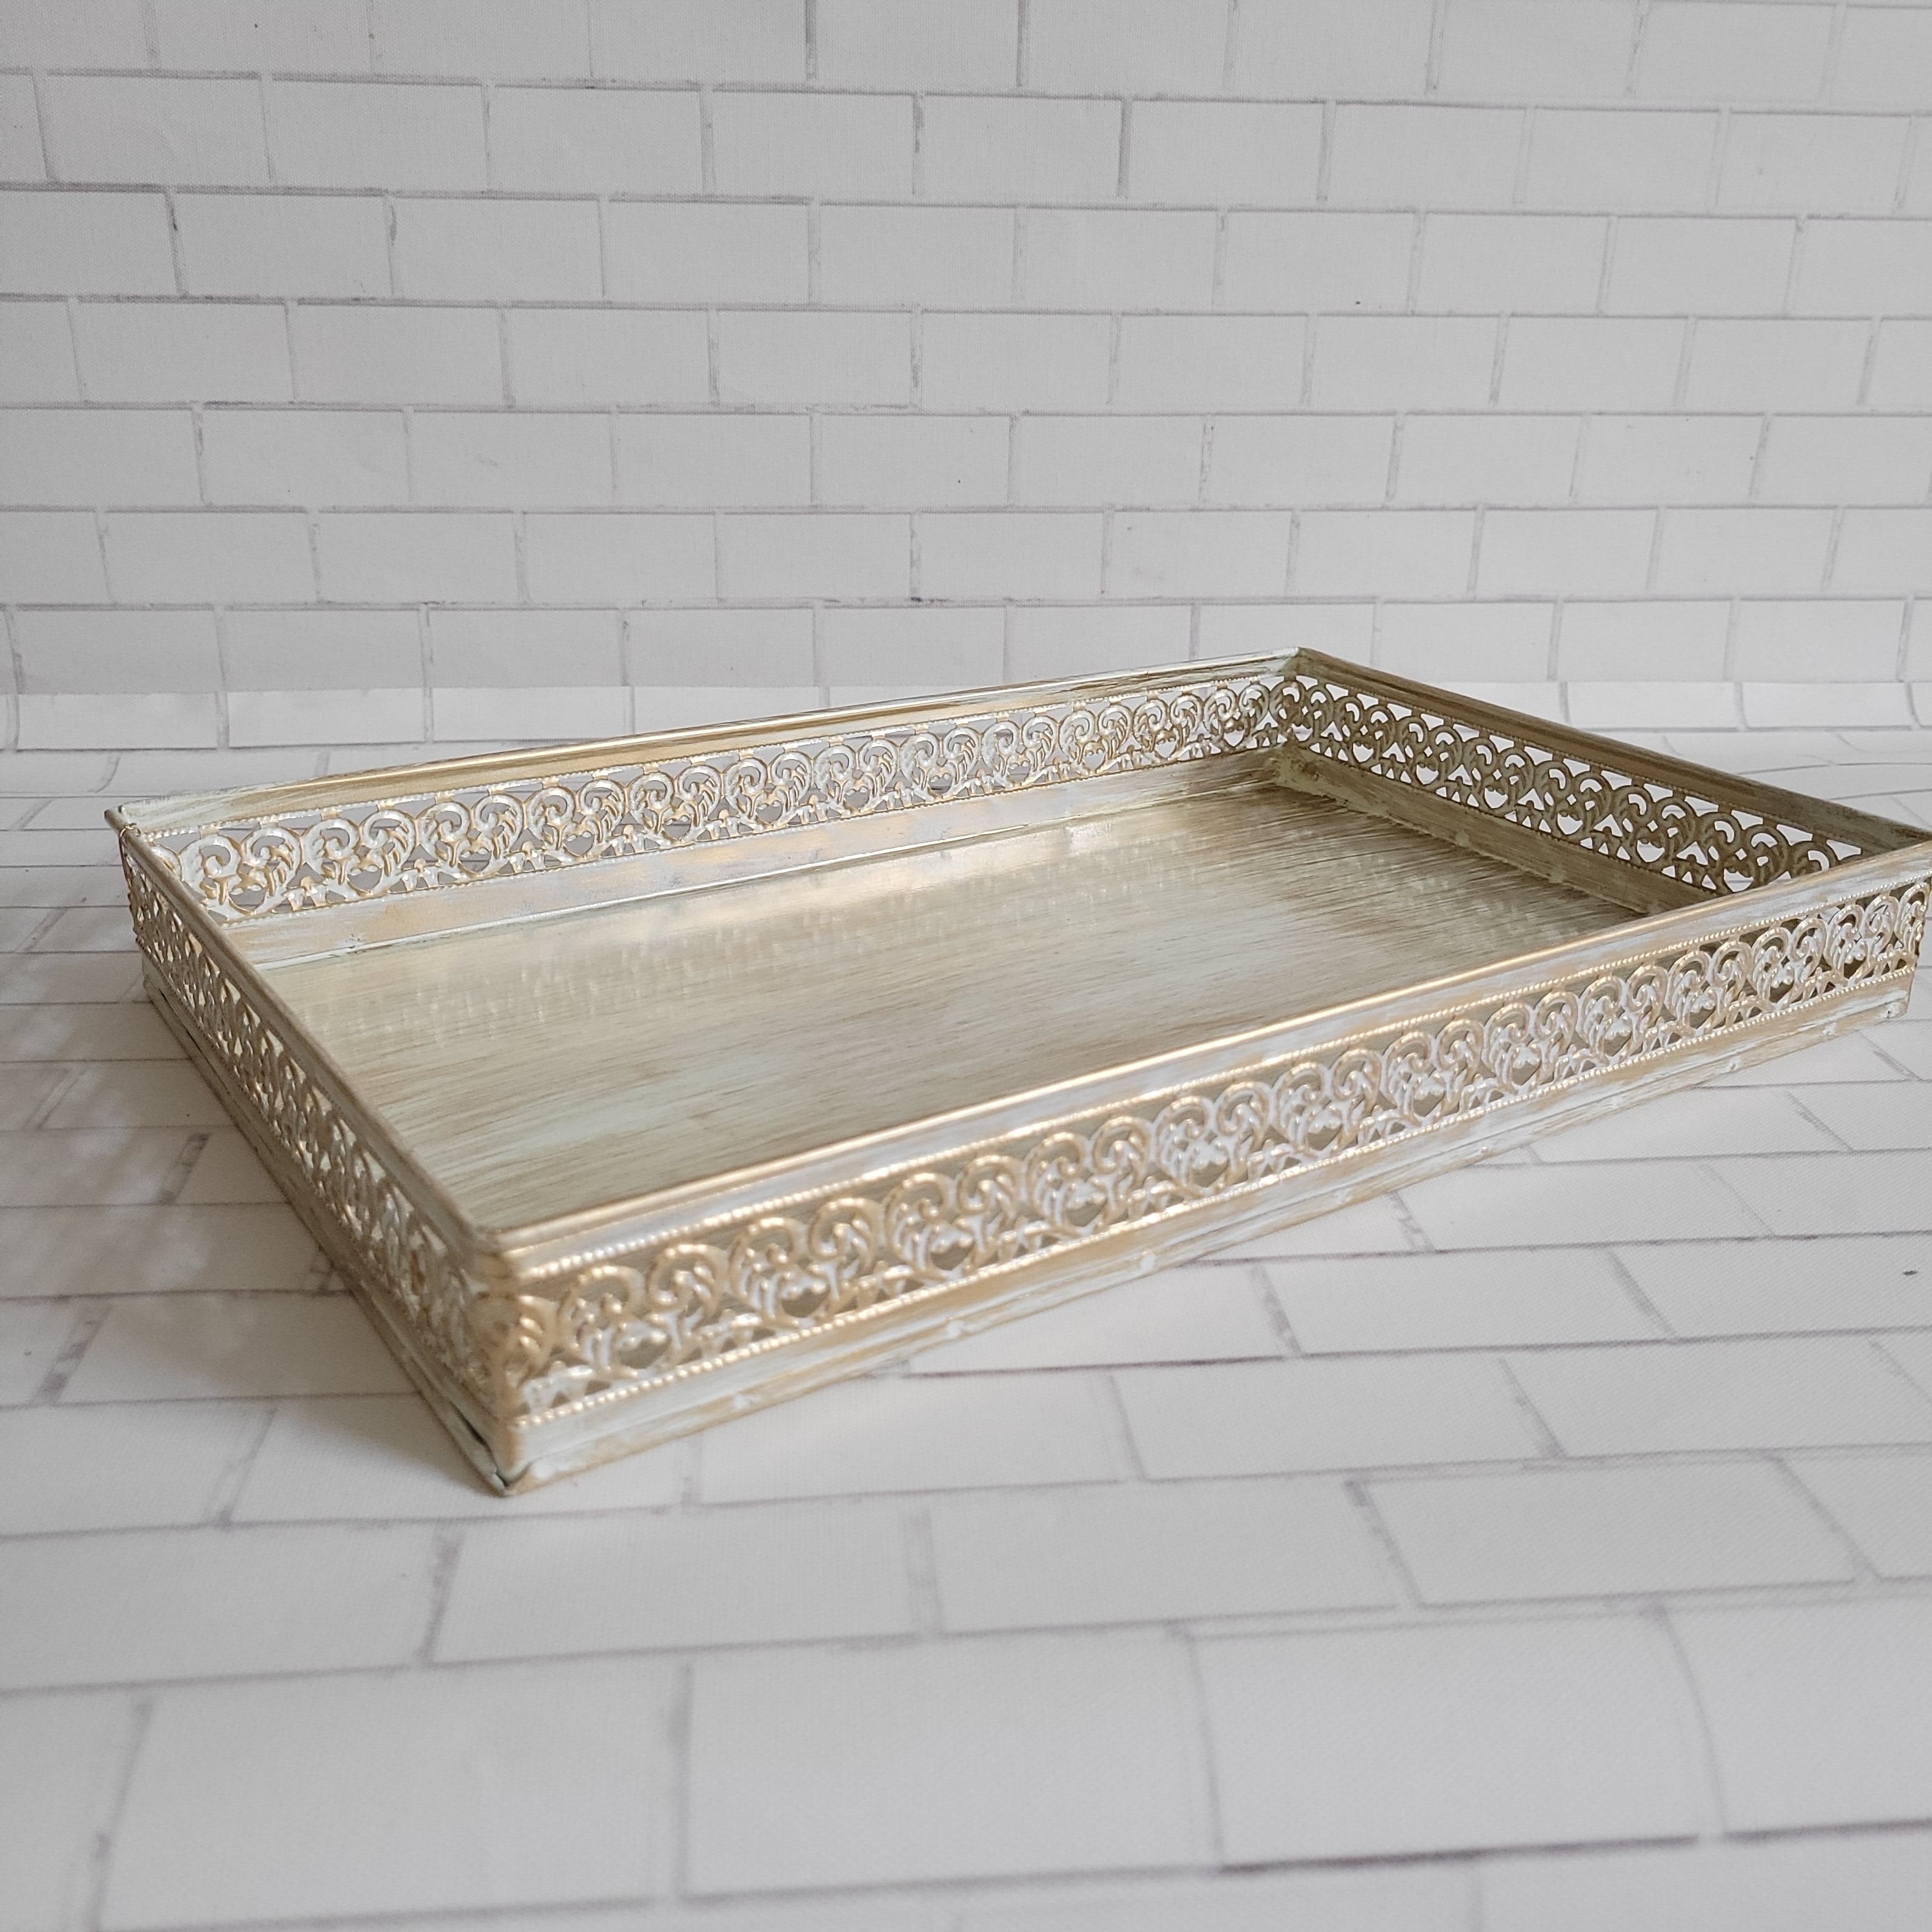 Floral art | White Metal Tray undefined